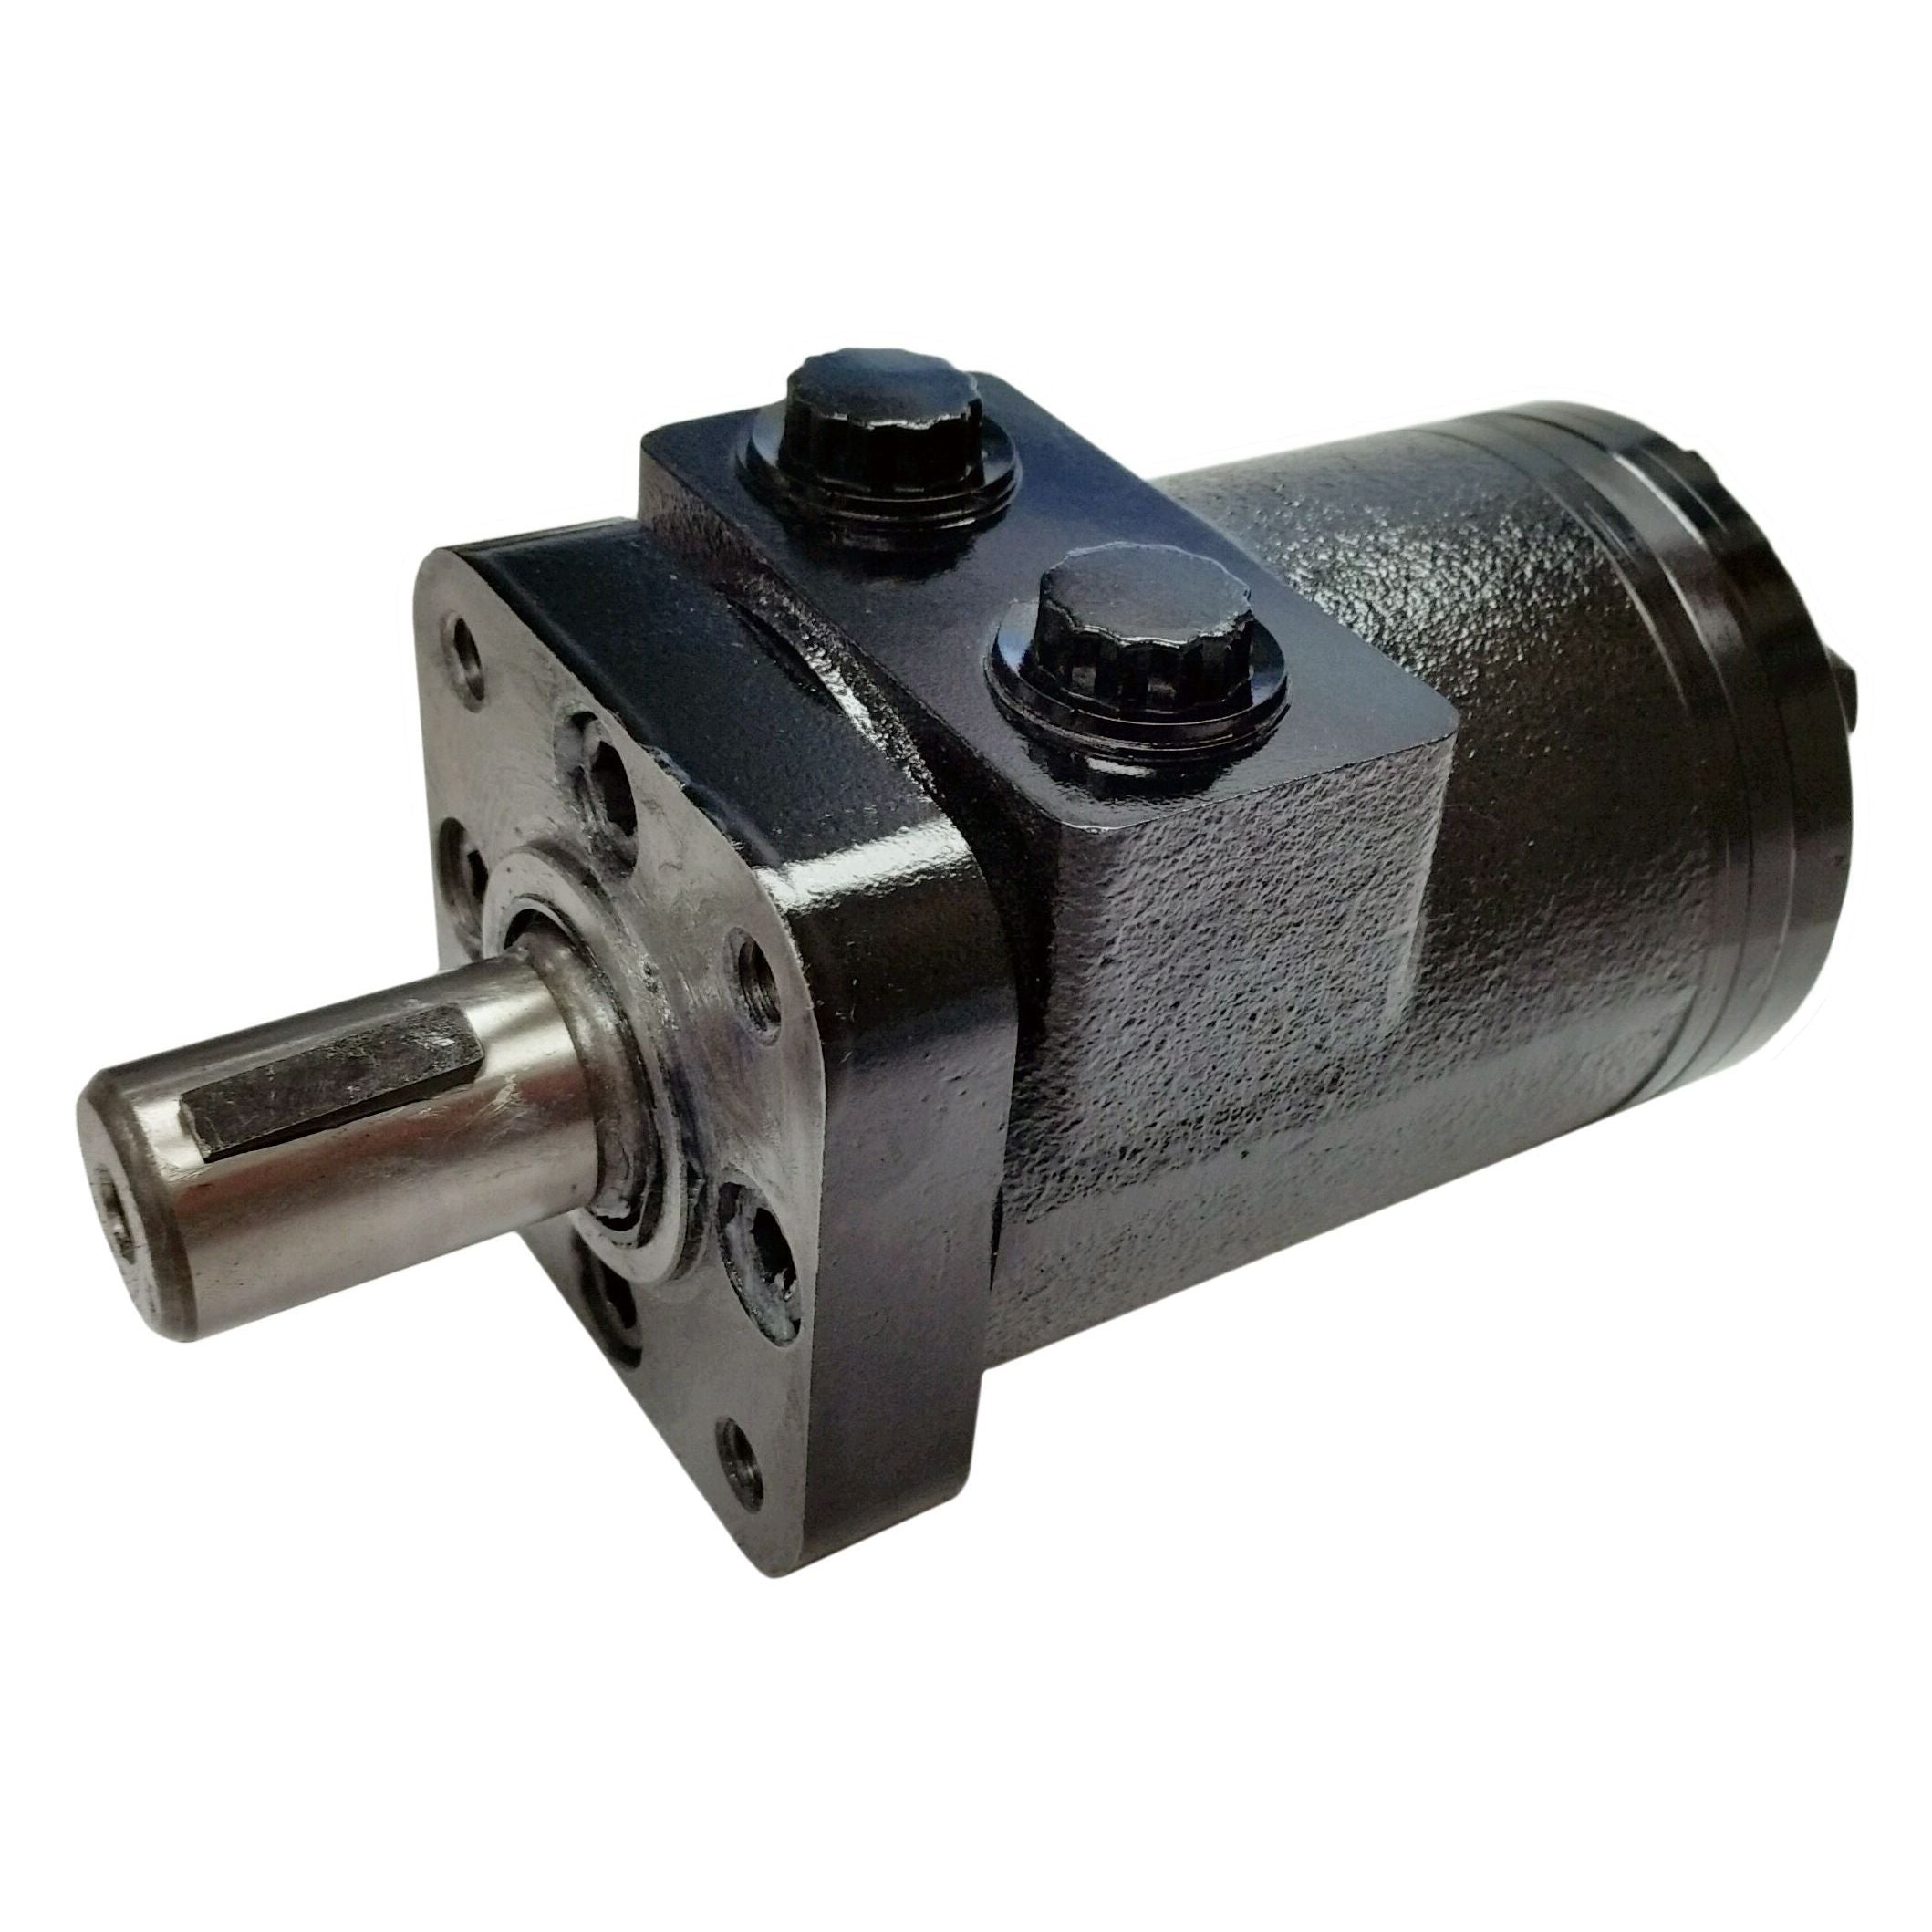 BMPH-50-H4-S-S : Dynamic LSHT Motor, 51.7cc, 1150RPM, 885in-lb, 2031psi Differential, 15.85GPM, SAE A 4-Bolt Mount, 6-Tooth Shaft, Side Ported, #10 SAE (5/8")